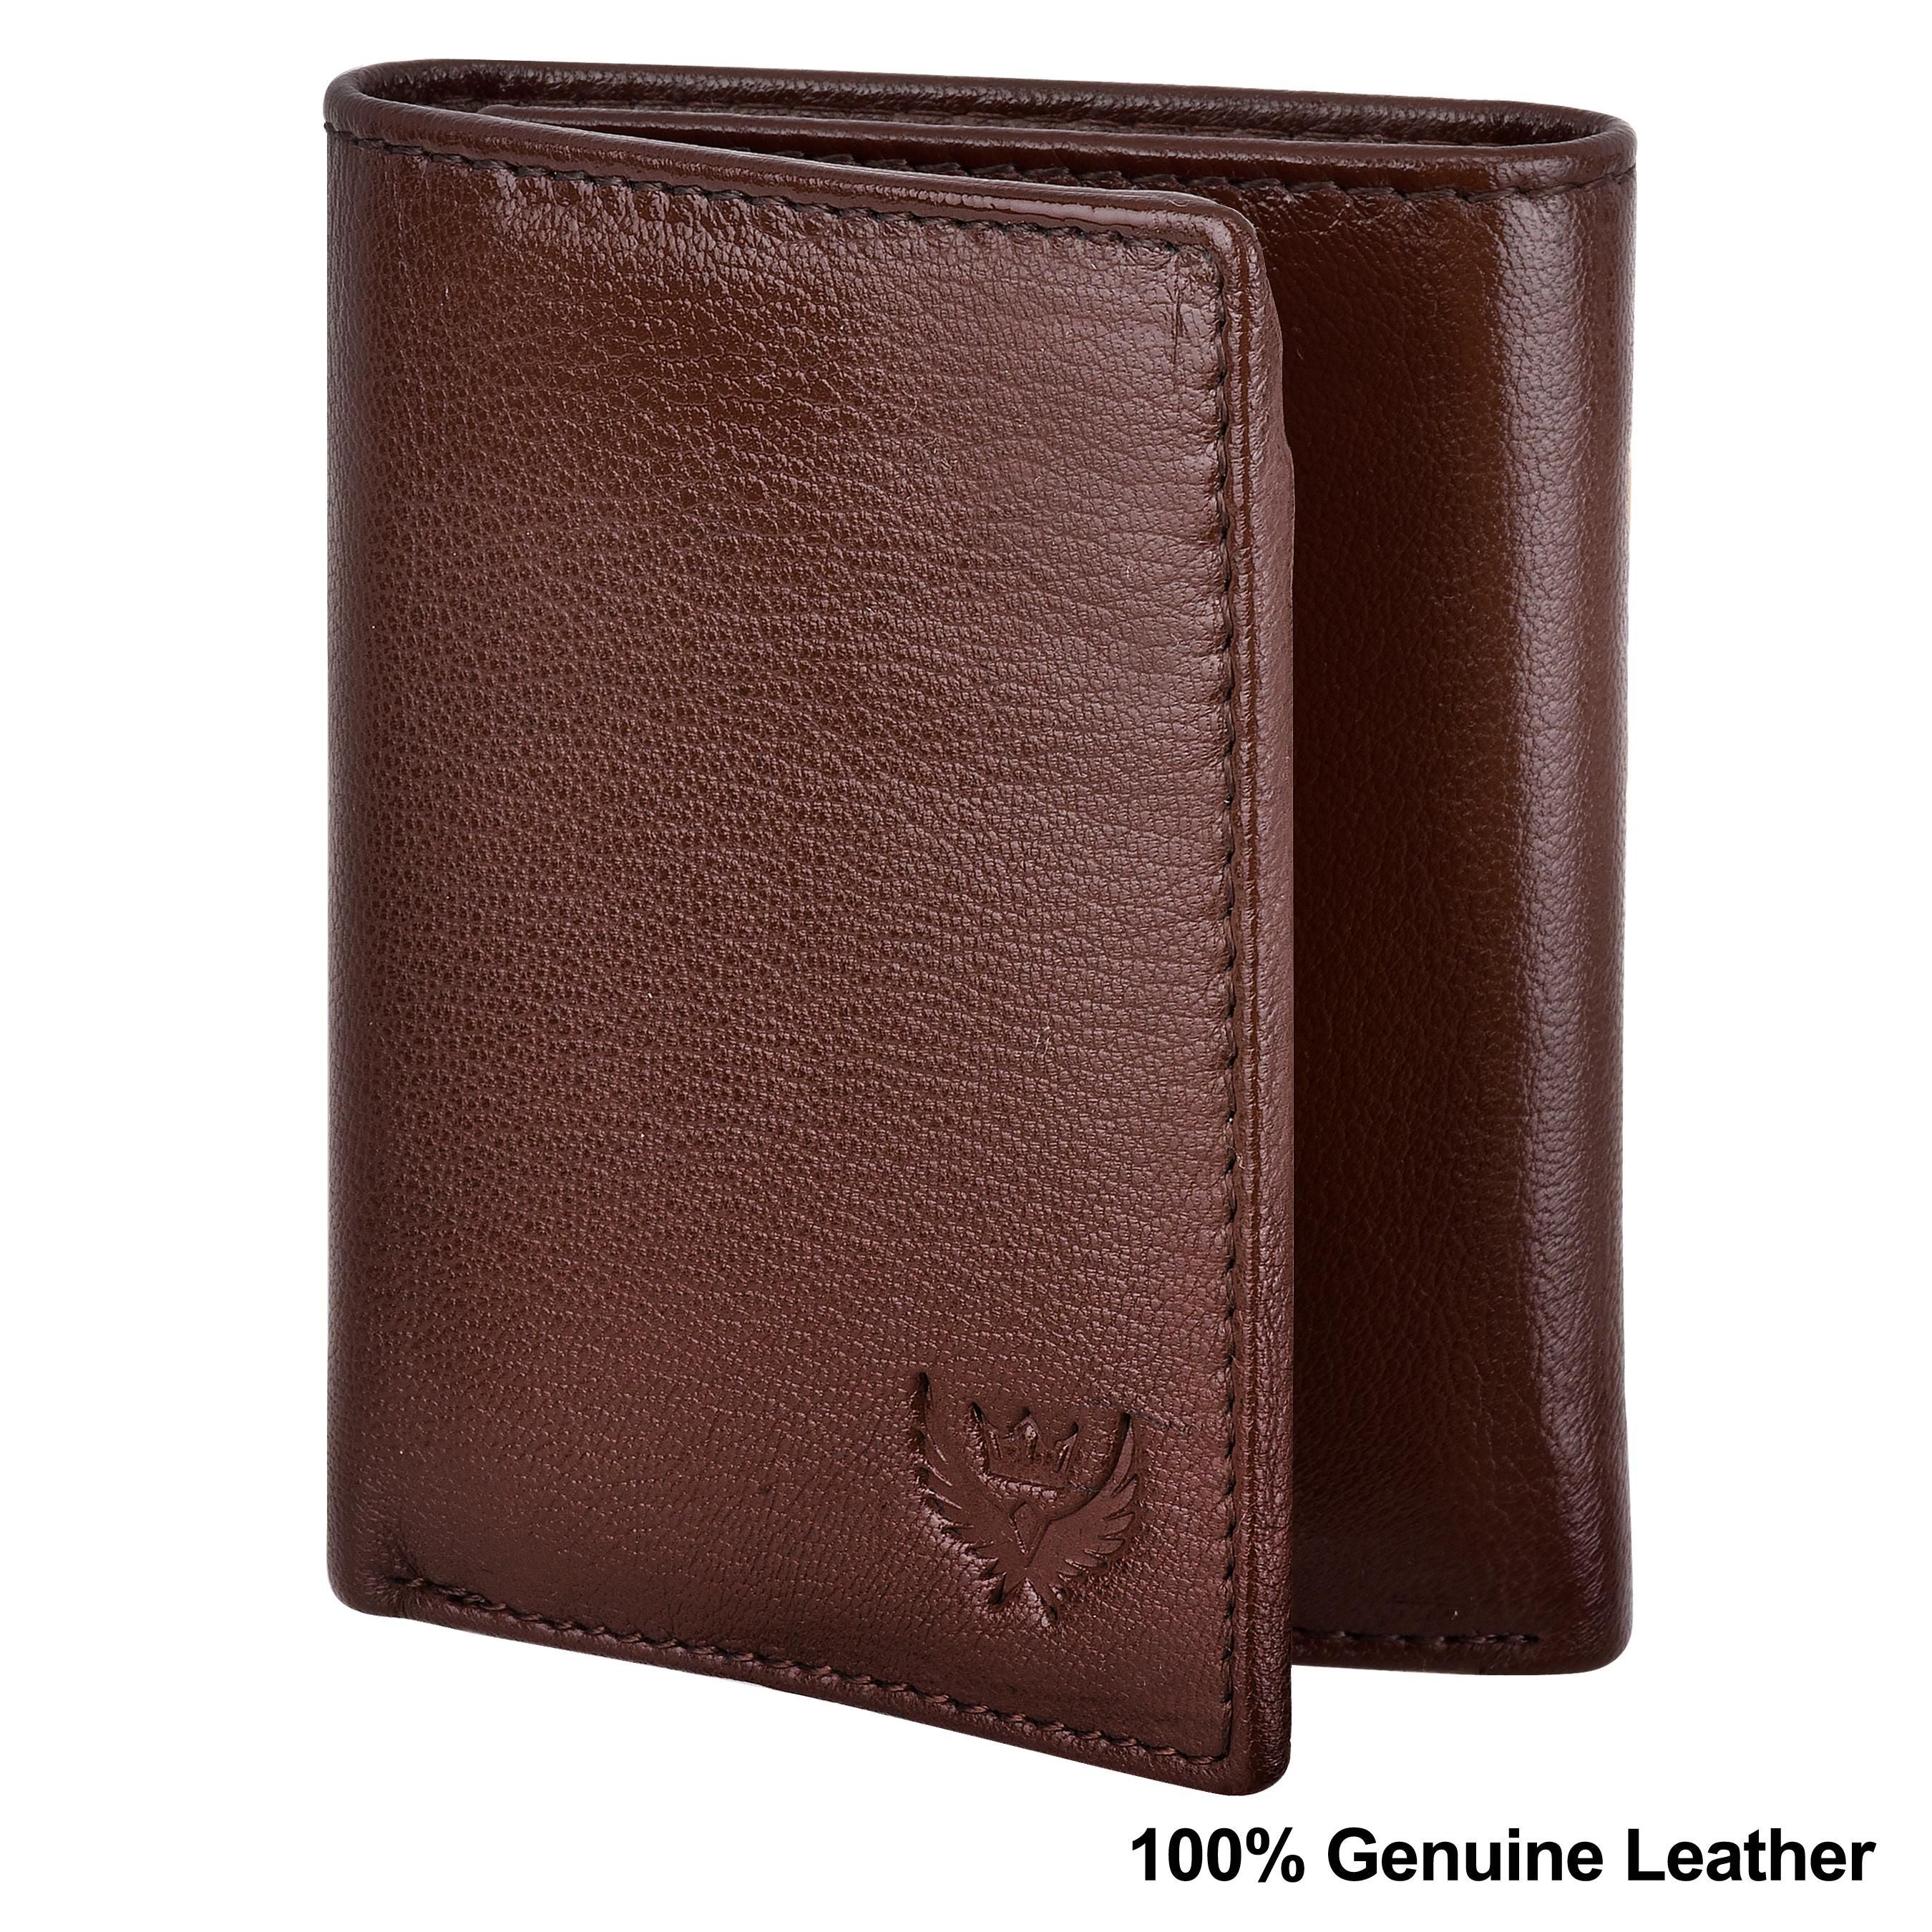 Men's RFID-Blocking Leather Wallet with ID Slot - TriFold Closure in Umber Brown